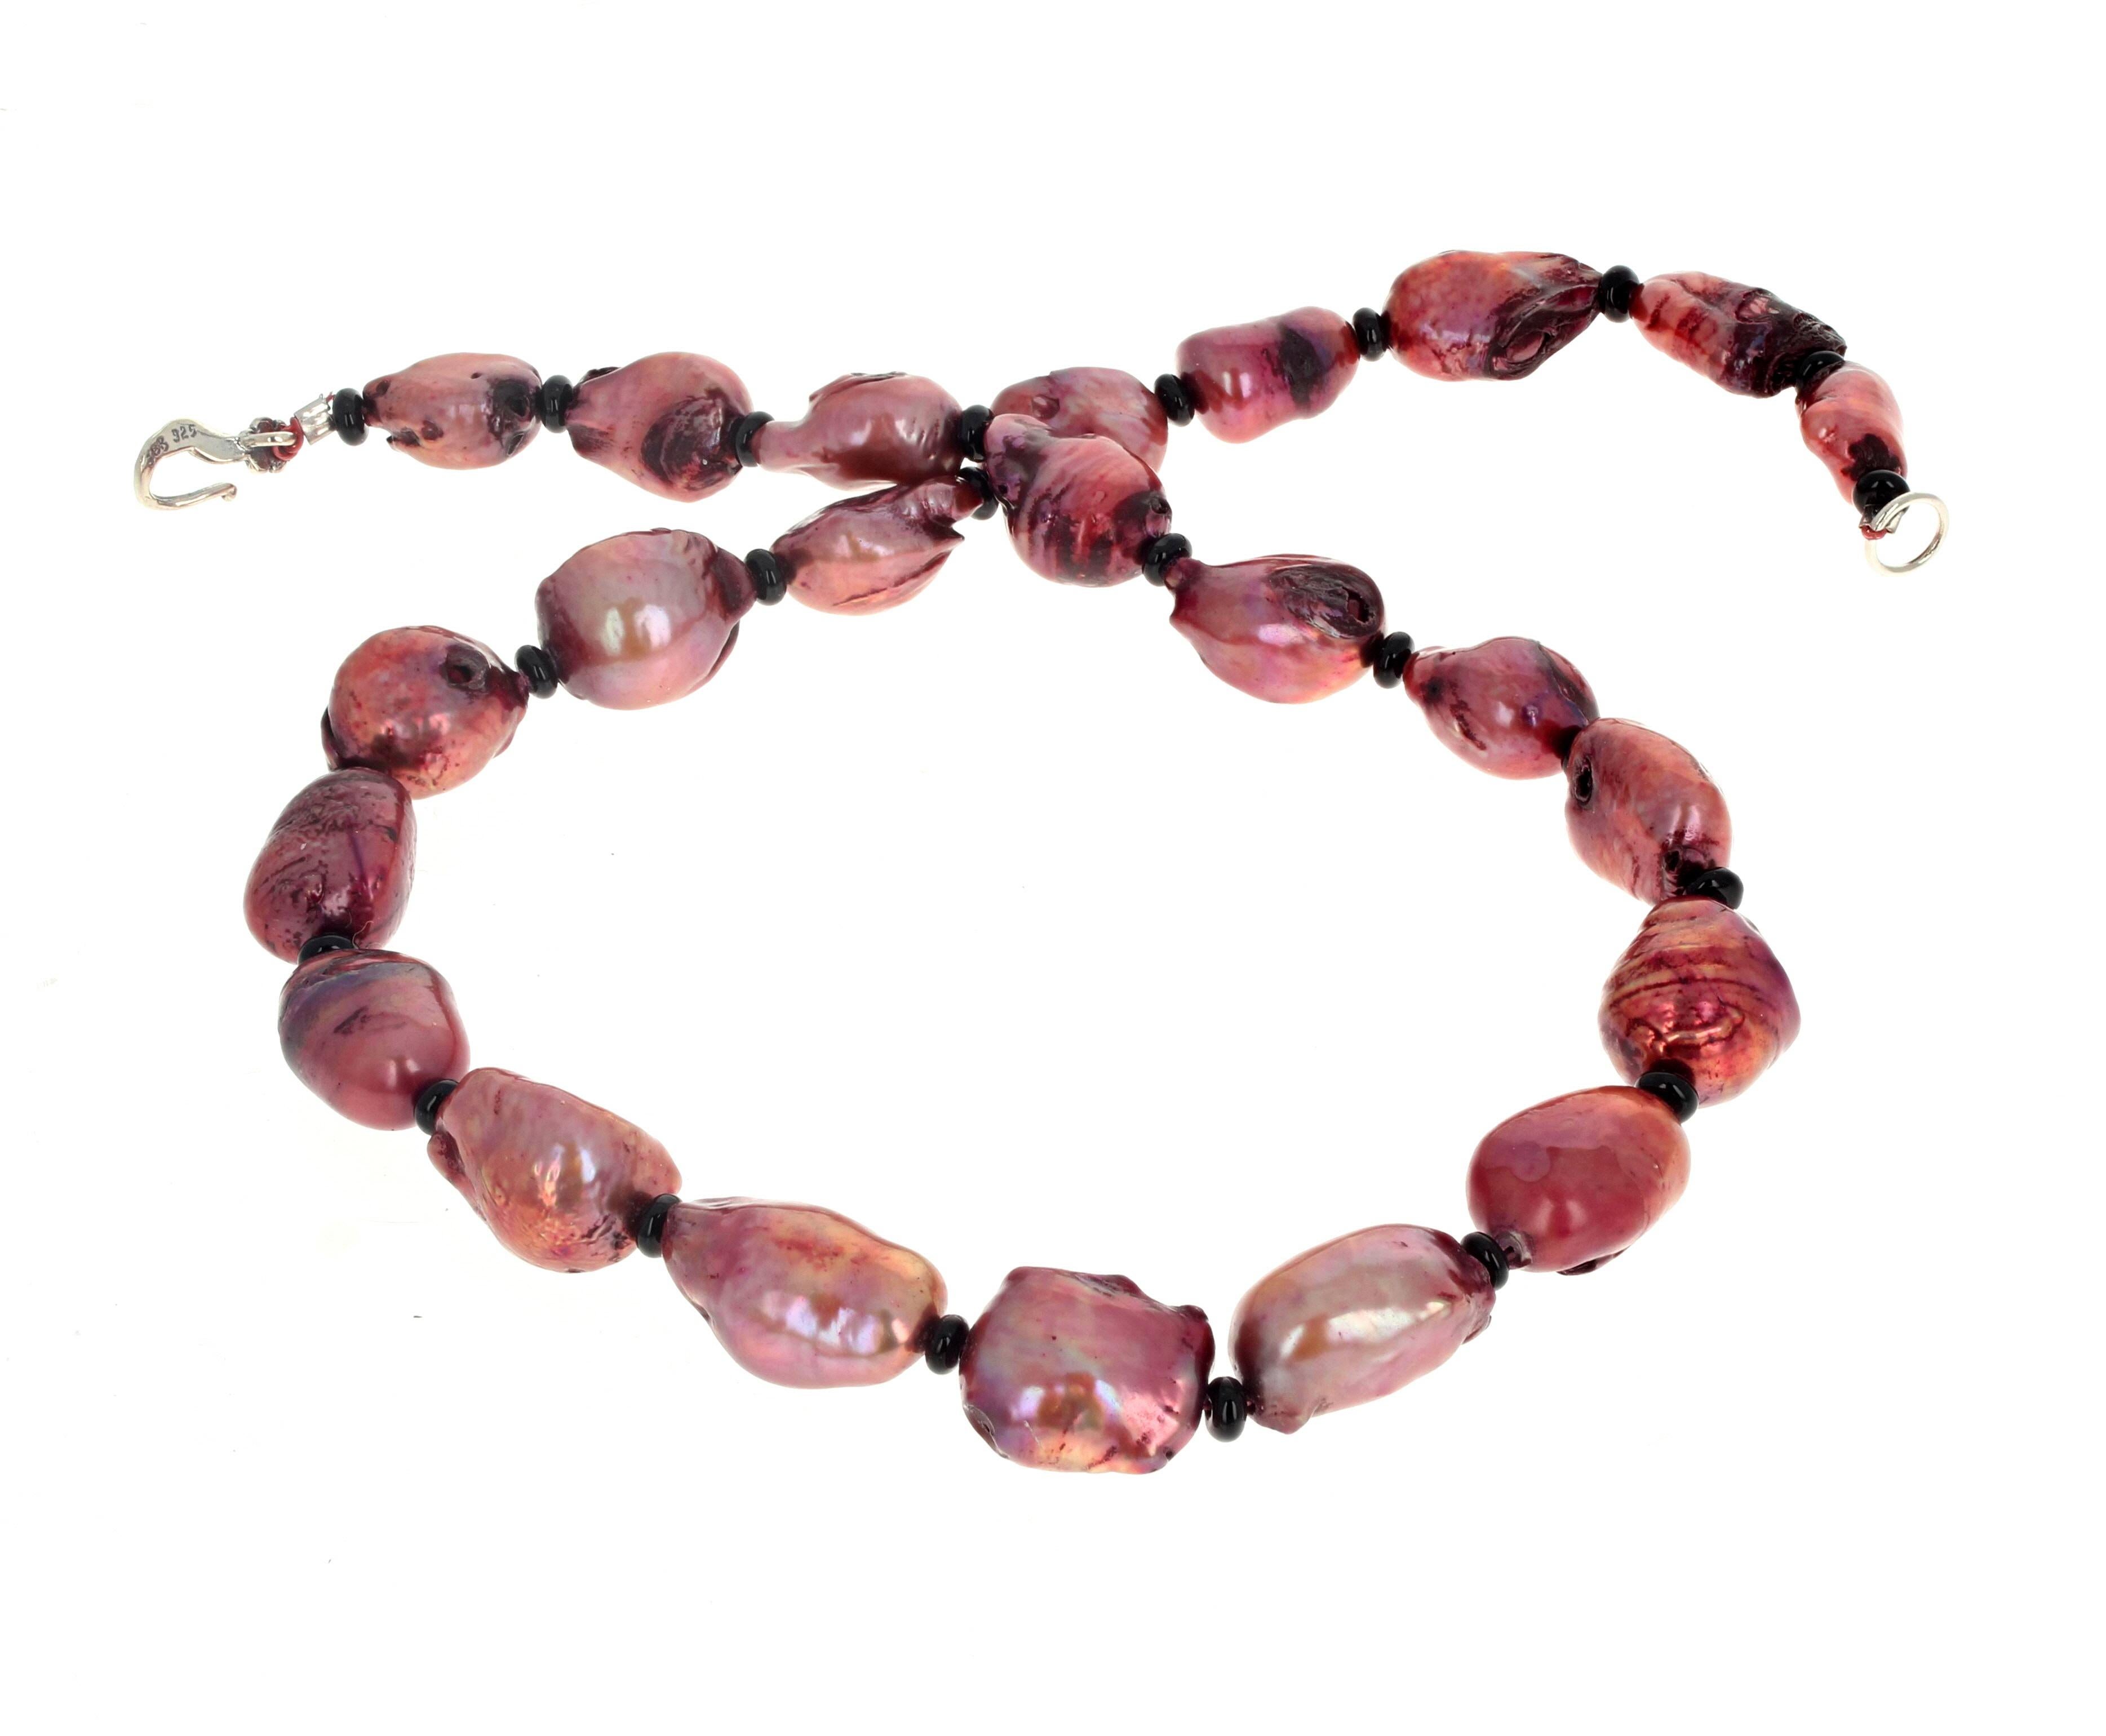 AJD Very Rare Glowing Coppery Pink Cultured Pearl Necklace For Sale 1